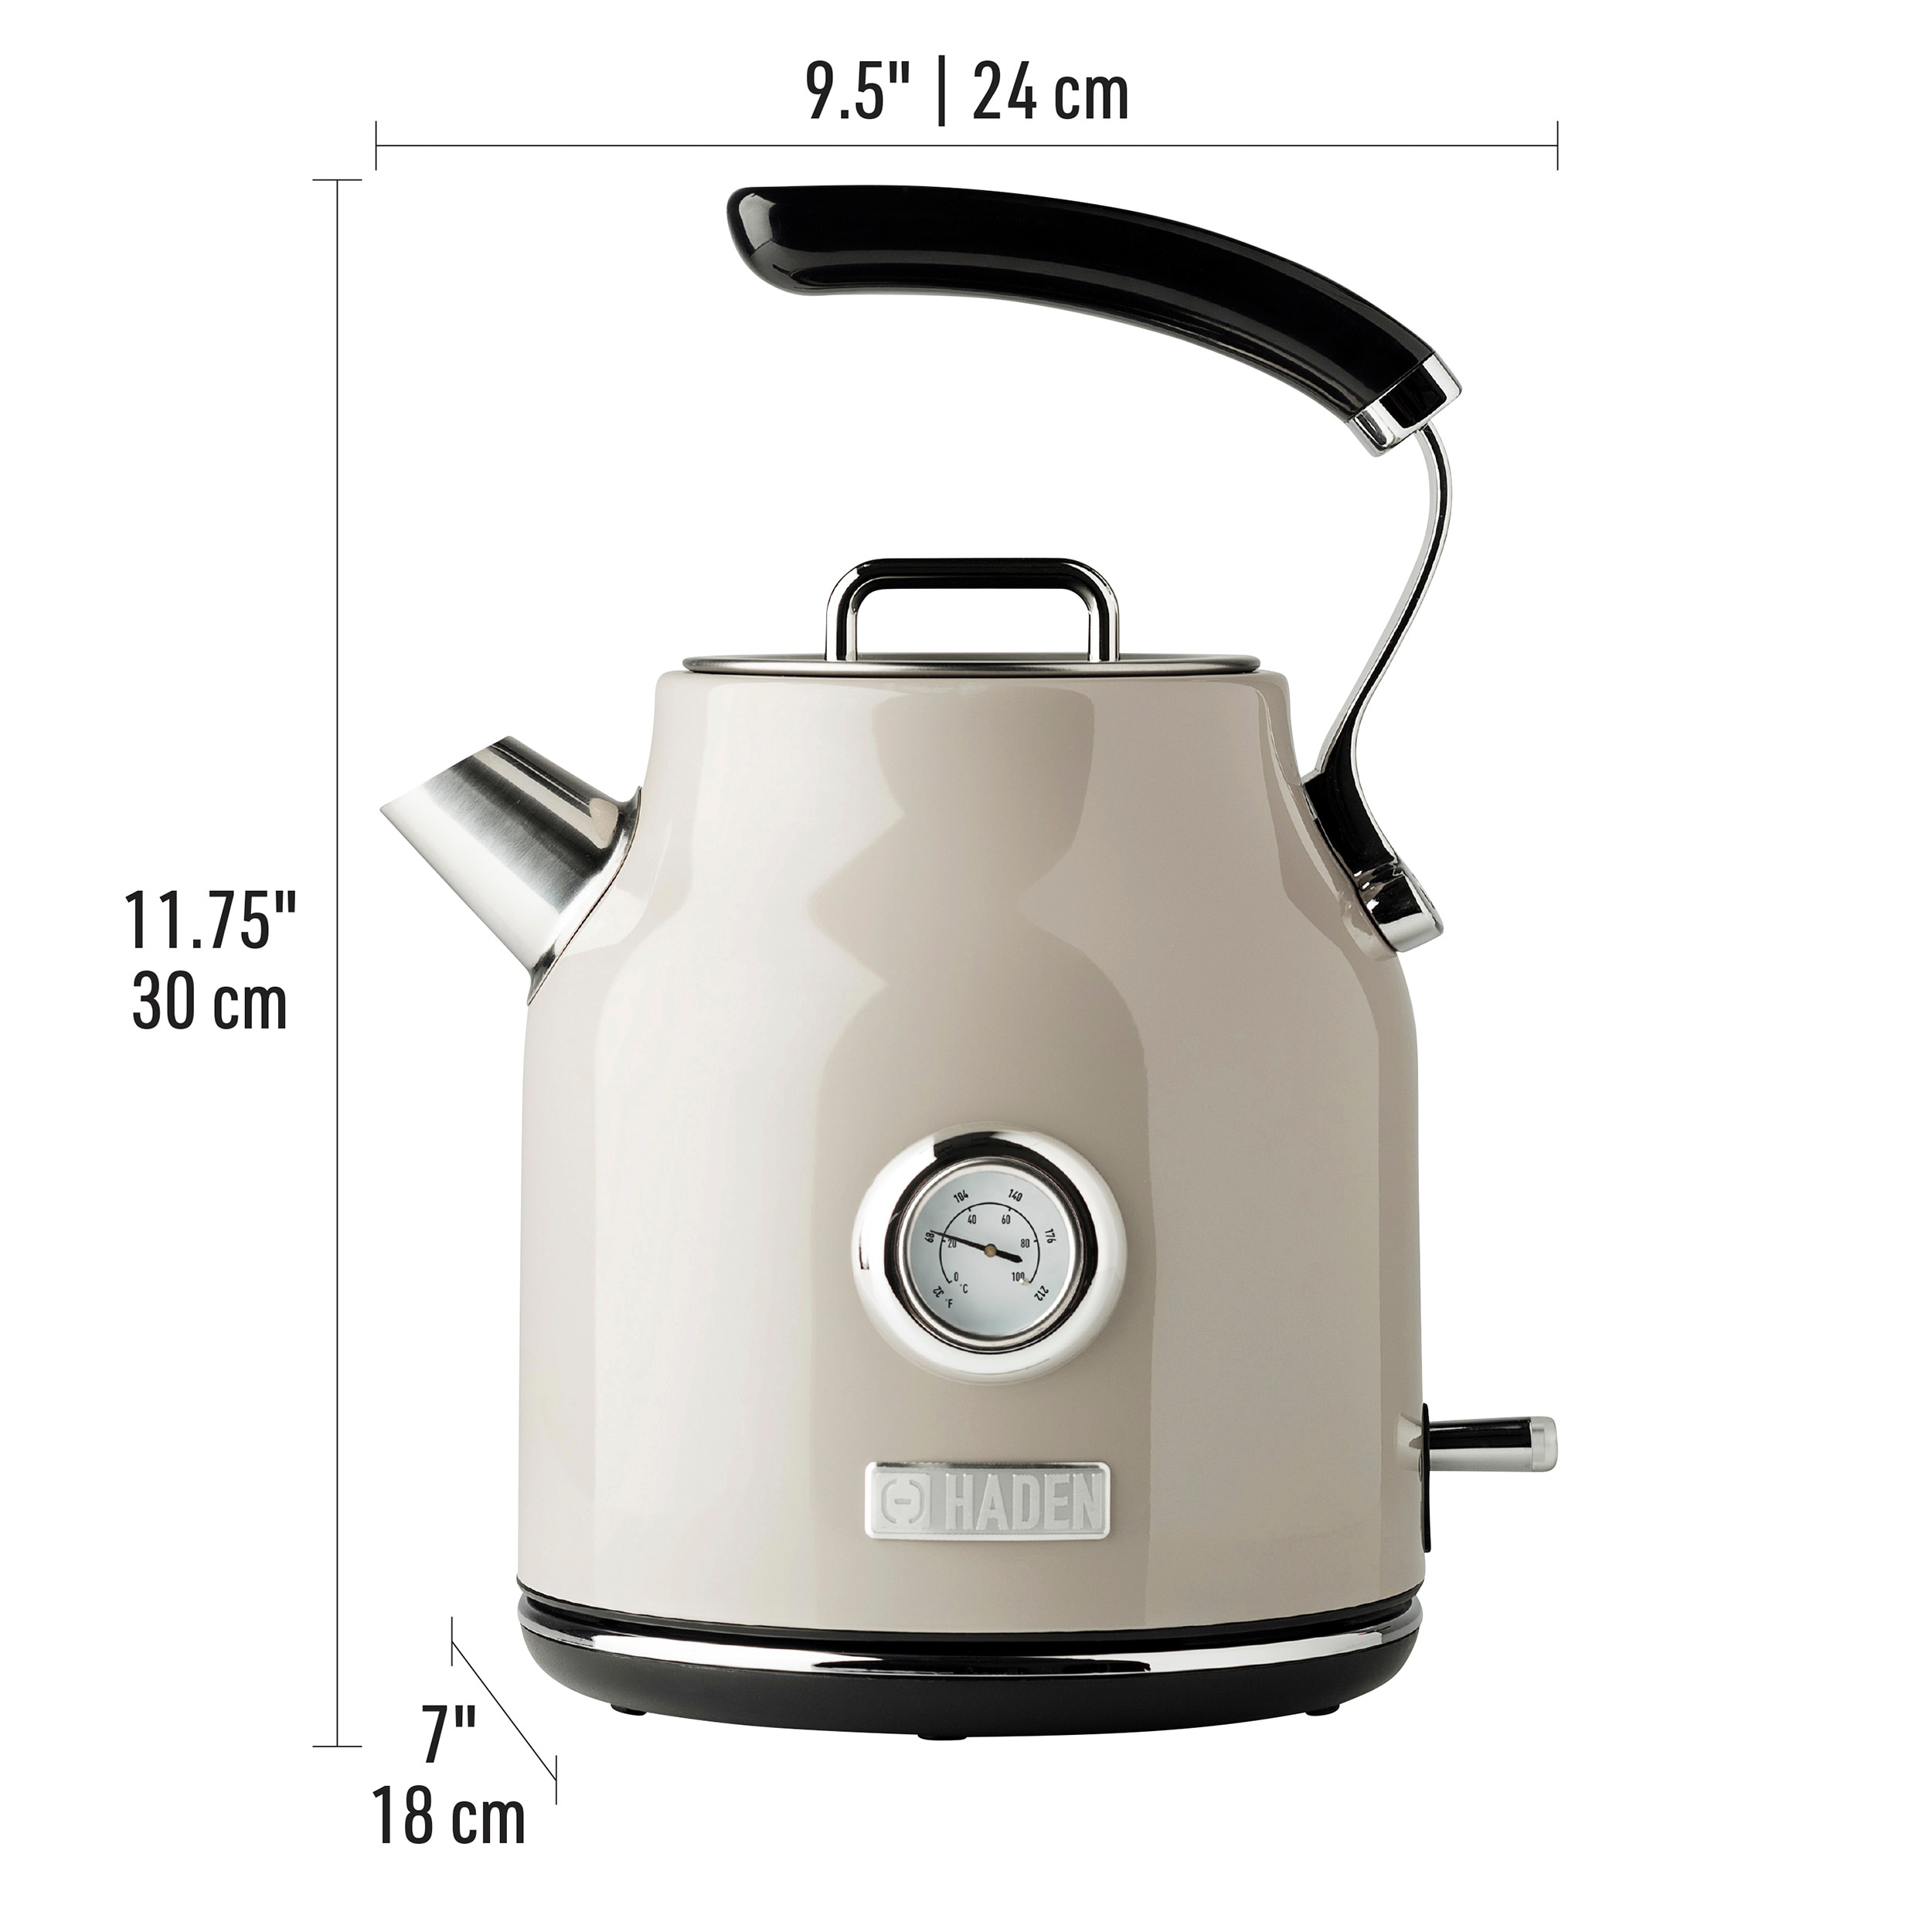 Kenmore Double-Walled Glass Electric Kettle 1.7L, Digital Programmable  Tea-Kettle, 4 Temperature Pre-Sets, Touch-Activated Controls, Cordless  Pouring